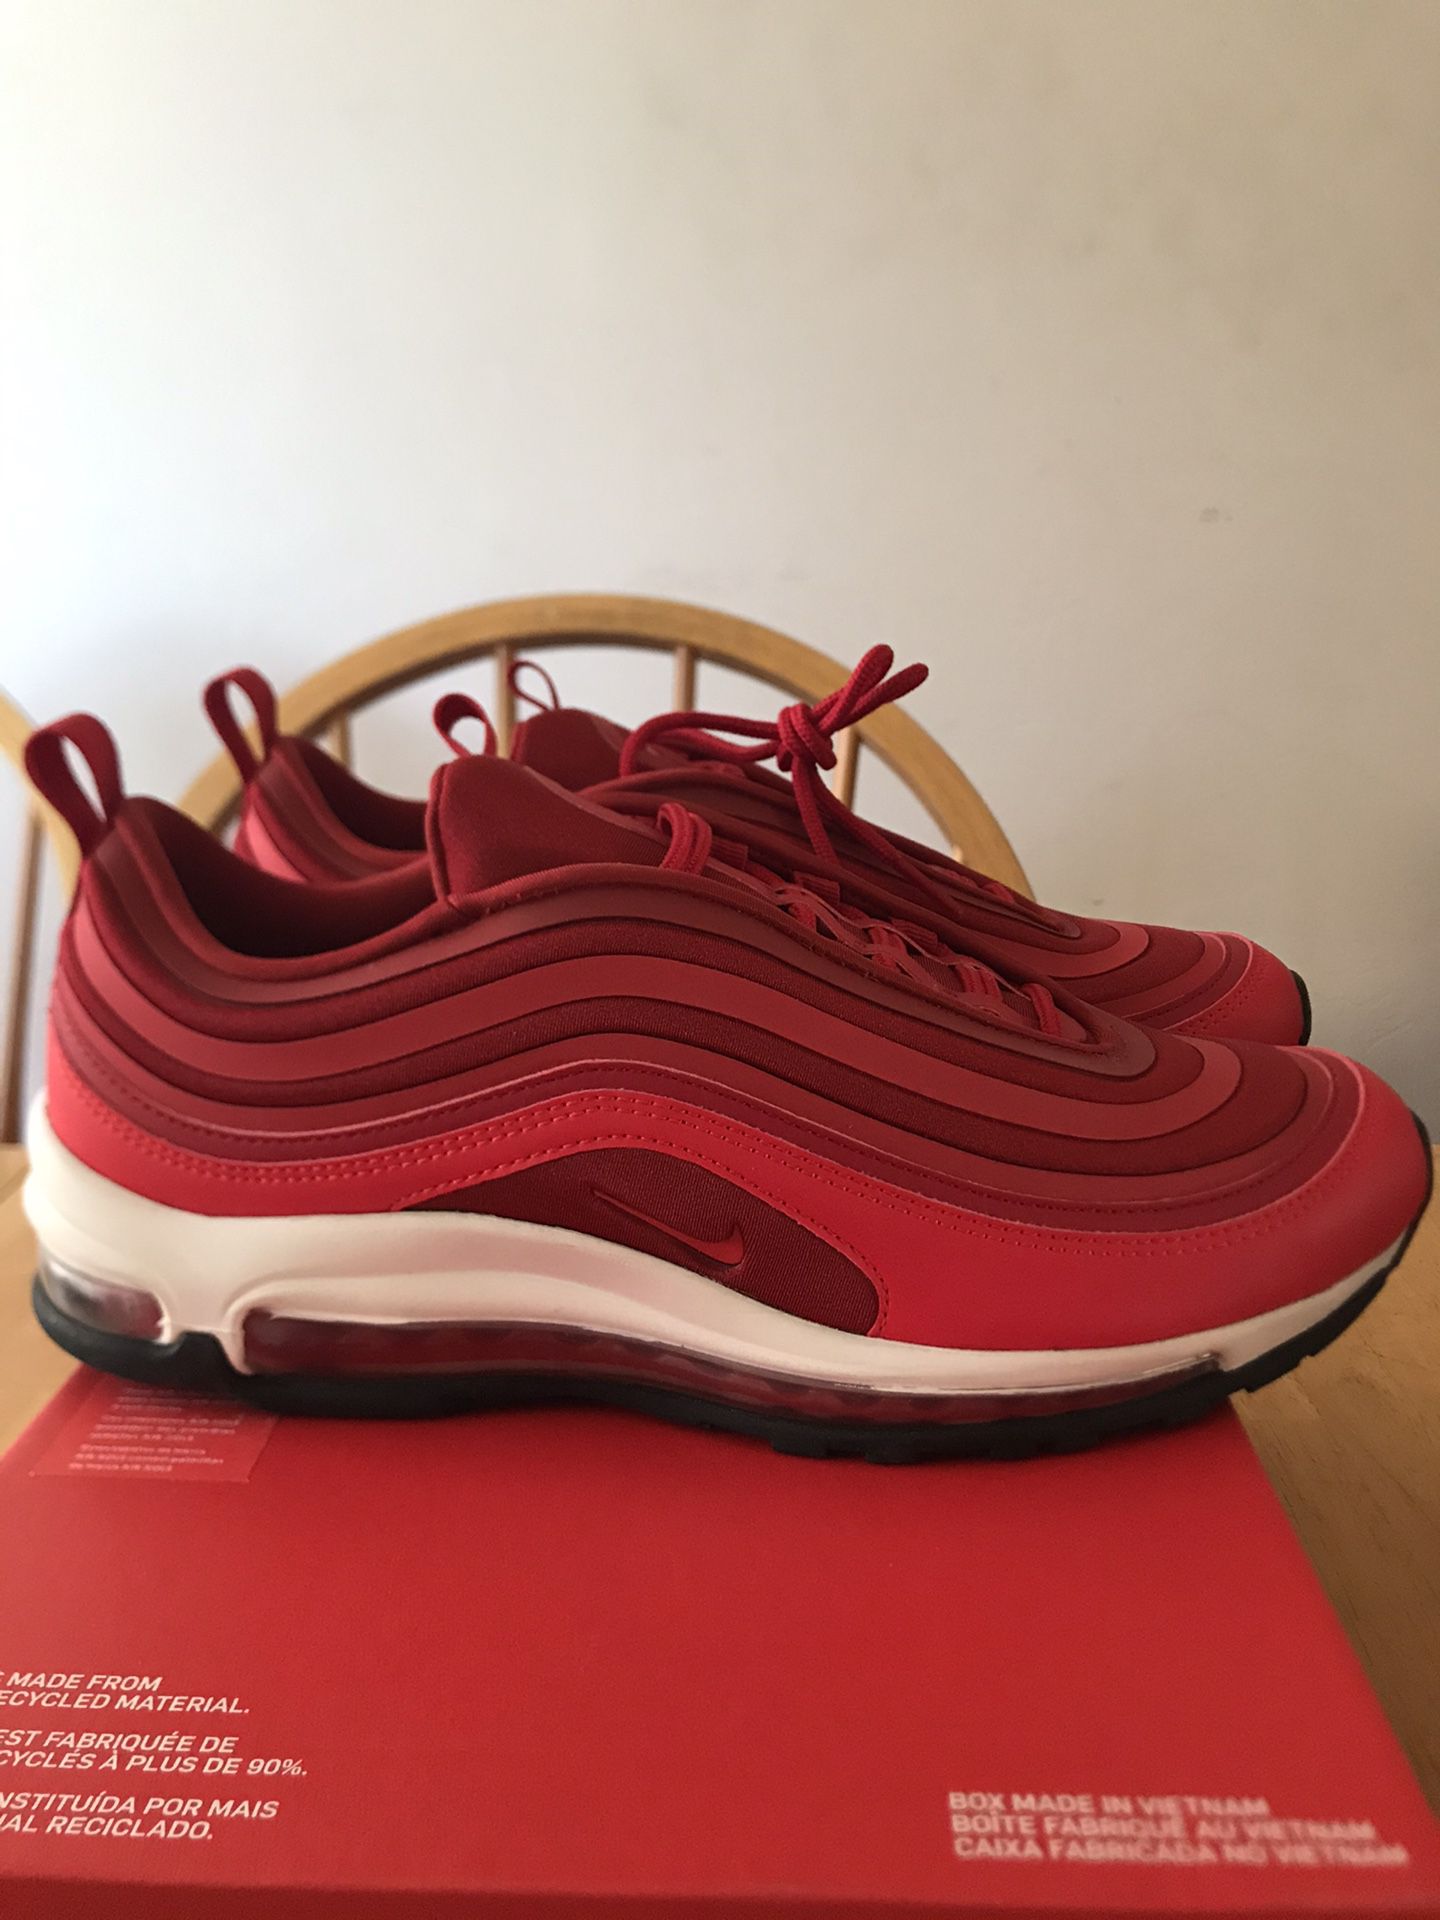 Brand new Nike air Max 97 gym red premium shoes (women’s size 10, men’s 8.5)